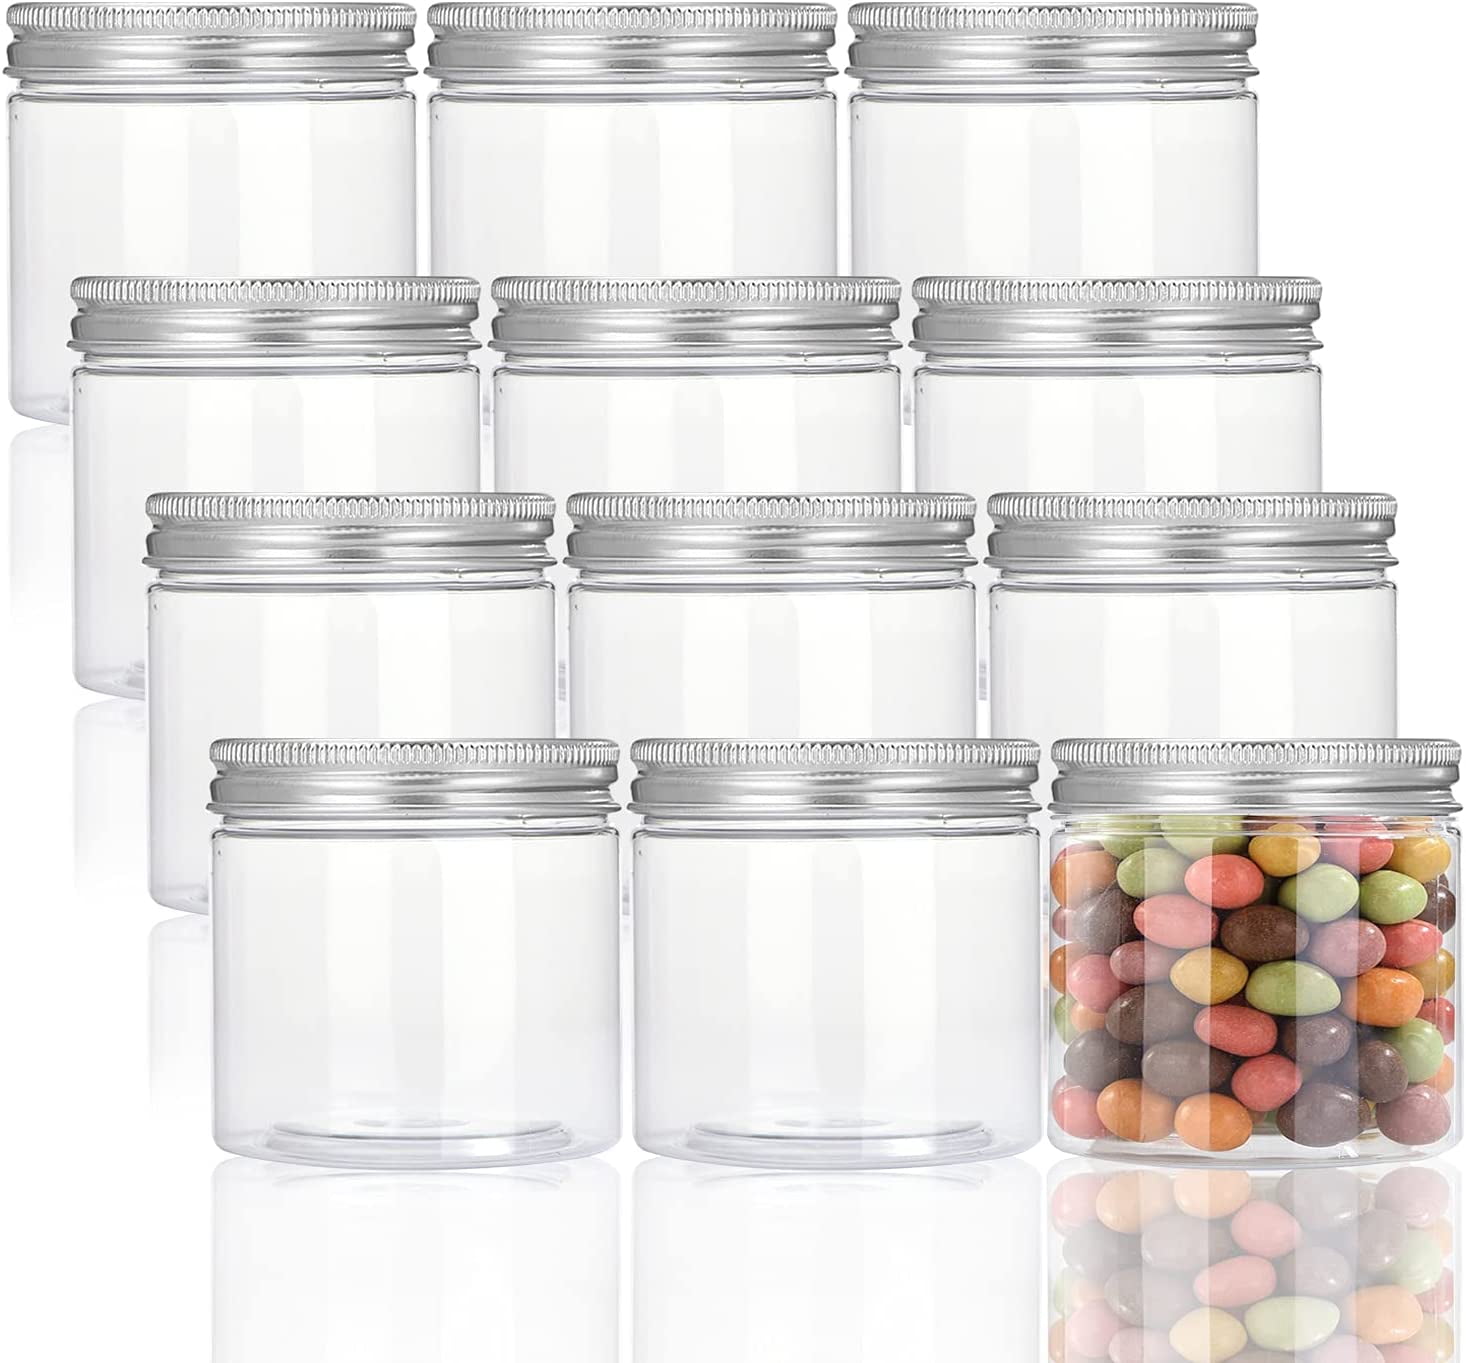 ZOOFOX 2 Pack Clear Plastic Jars, 1.5 Gallon Square Plastic Containers with  Screw-On Lids, Refillable Empty Plastic Jars for Kitchen & Household